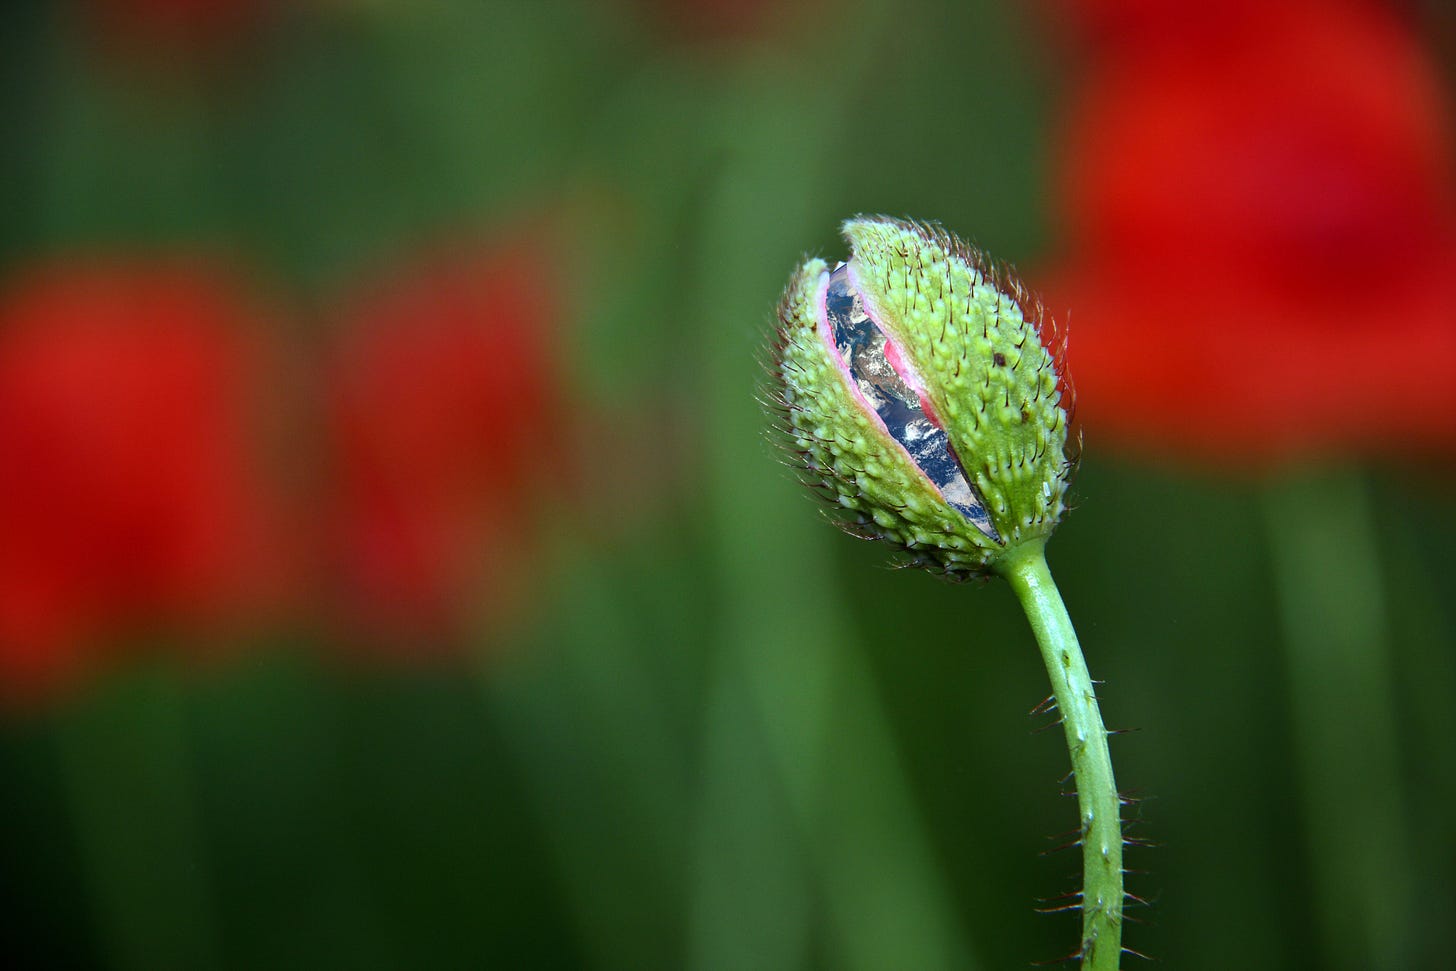 Image of a plant budding, inside the opening bud is revealed the earth as if ready to flower.